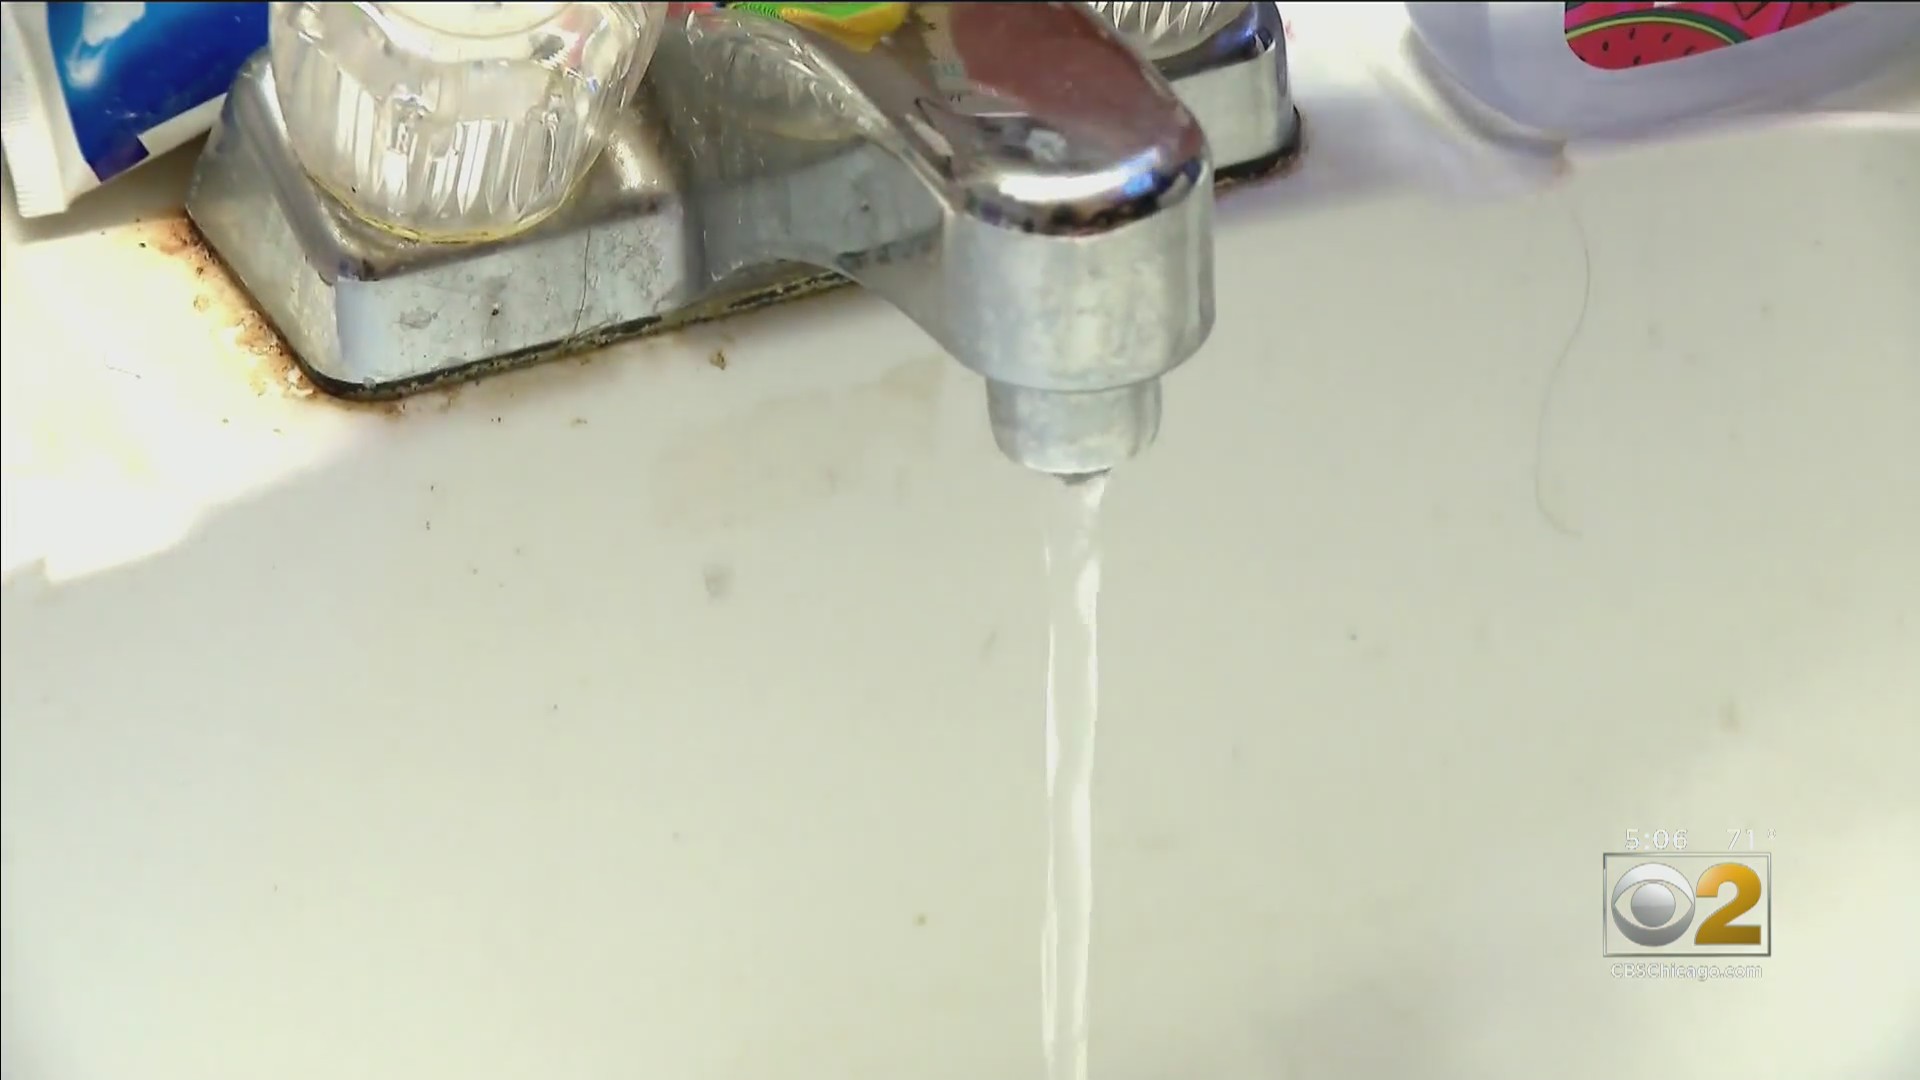 More Water Problems In Dixmoor, After Pipe Breaks In Harvey; ‘I Just Hope They Fix It Soon’